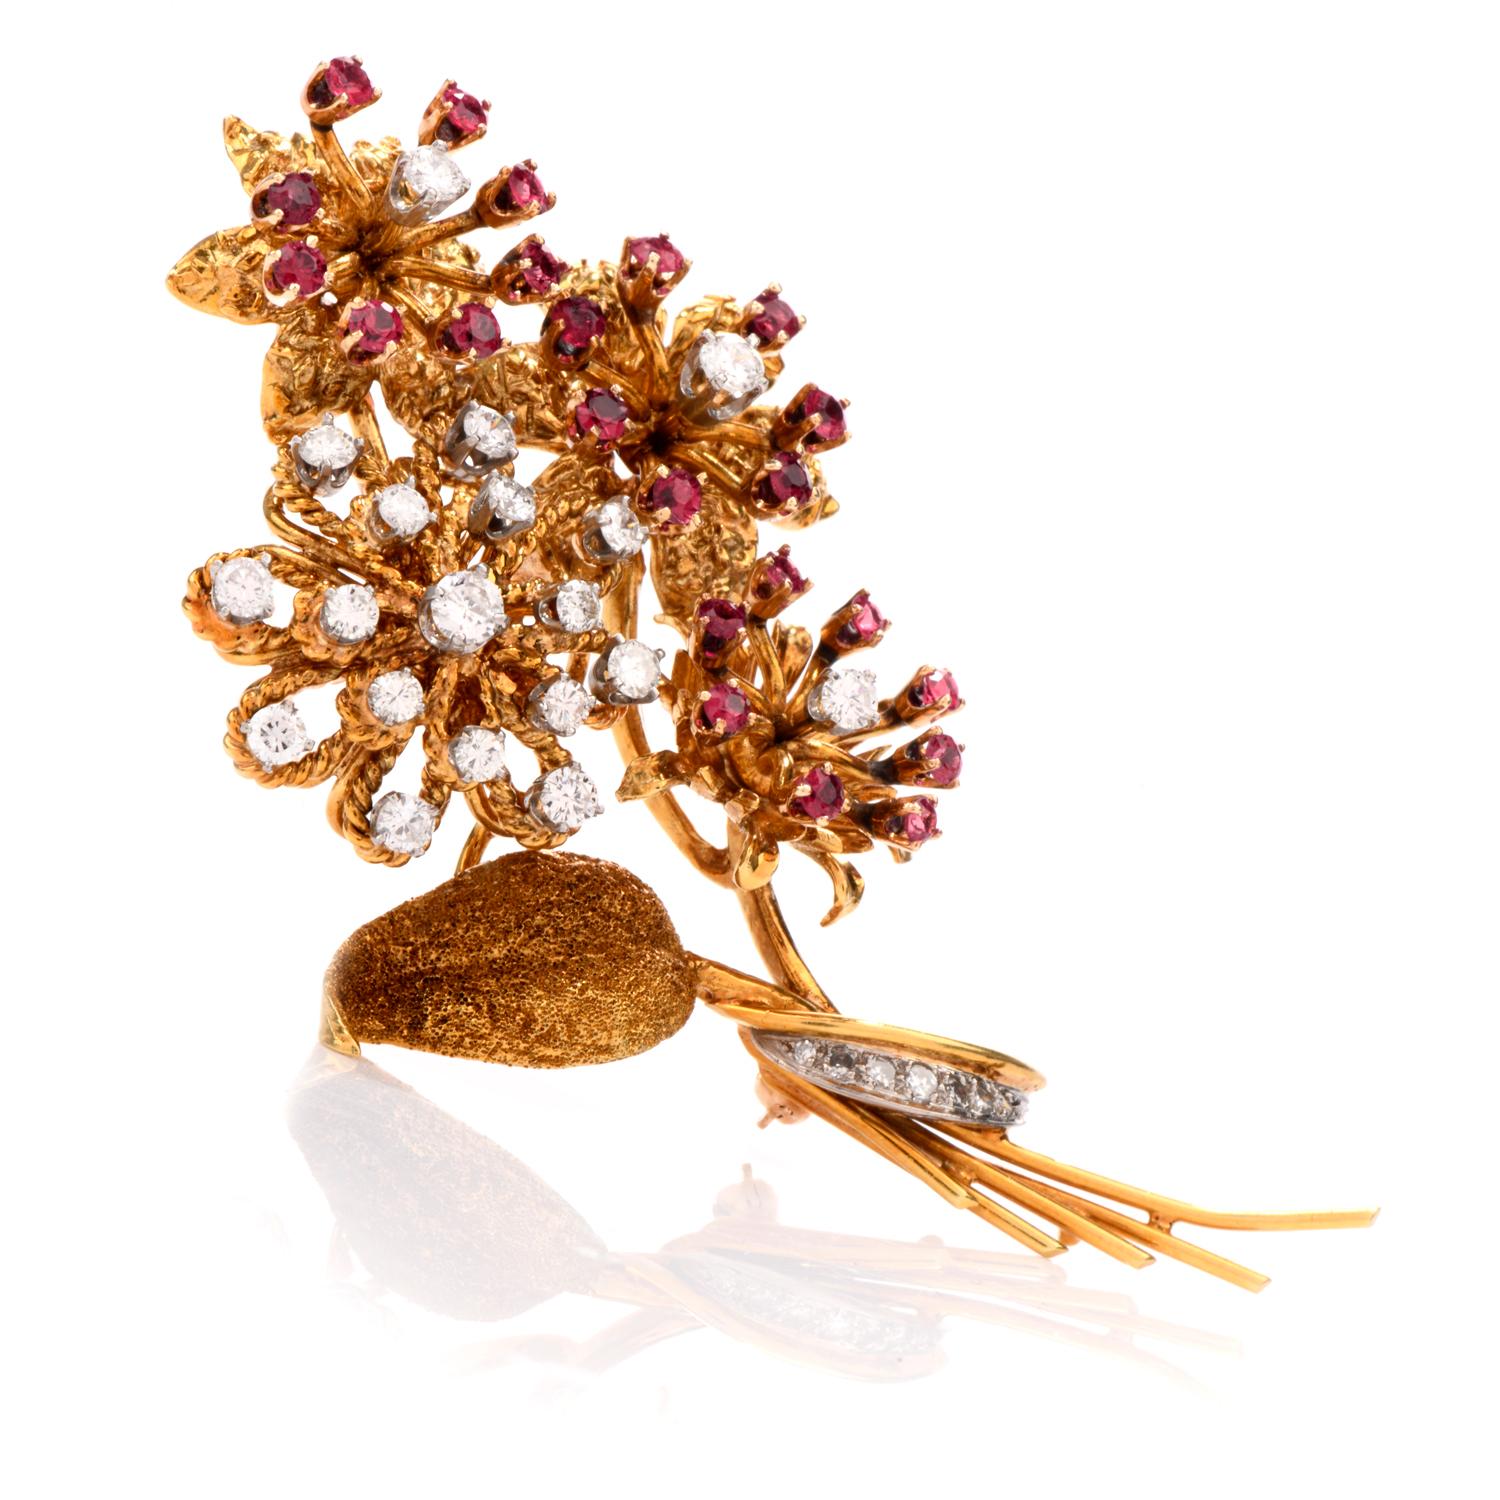 The bouquet of flowers will make anyone smile!

This vintage 50's  brooch was inspired in a floral bouquet and crafted in 18K gold. 3 of the 4 flowers have diamond centers and round rubies accenting around while the 

4th flower hosts 18 round